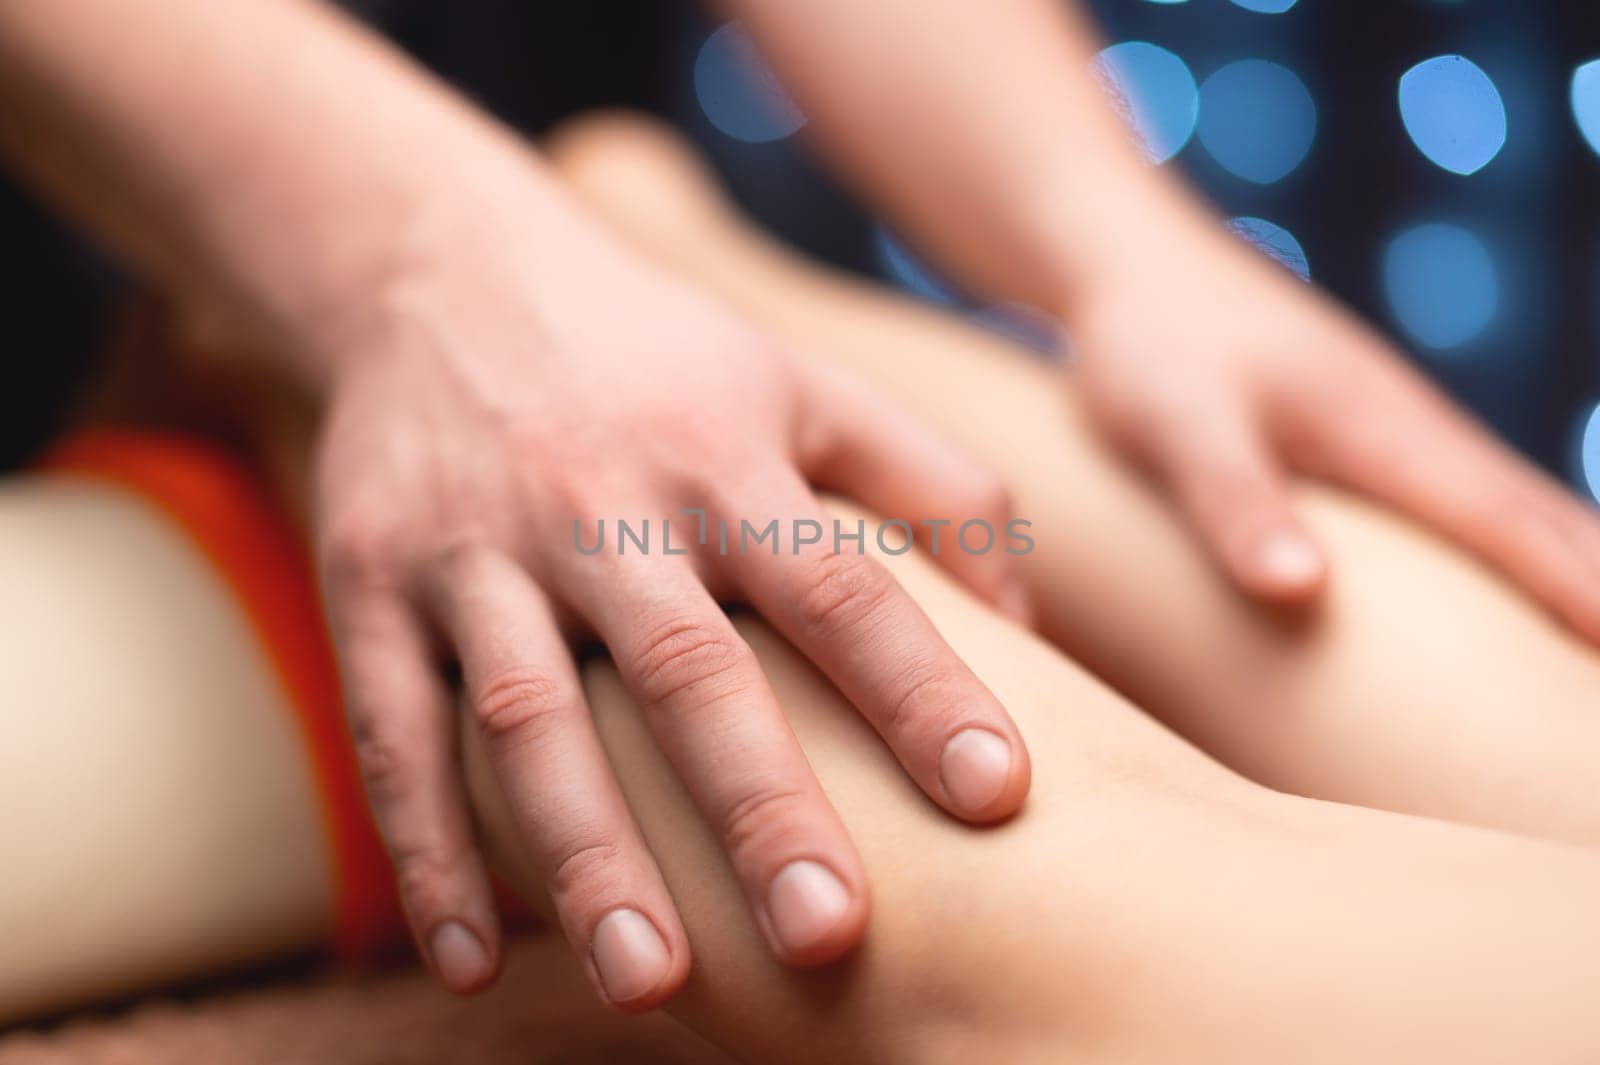 Massage stroking the ankle muscles in a professional office in a shallow depth of field